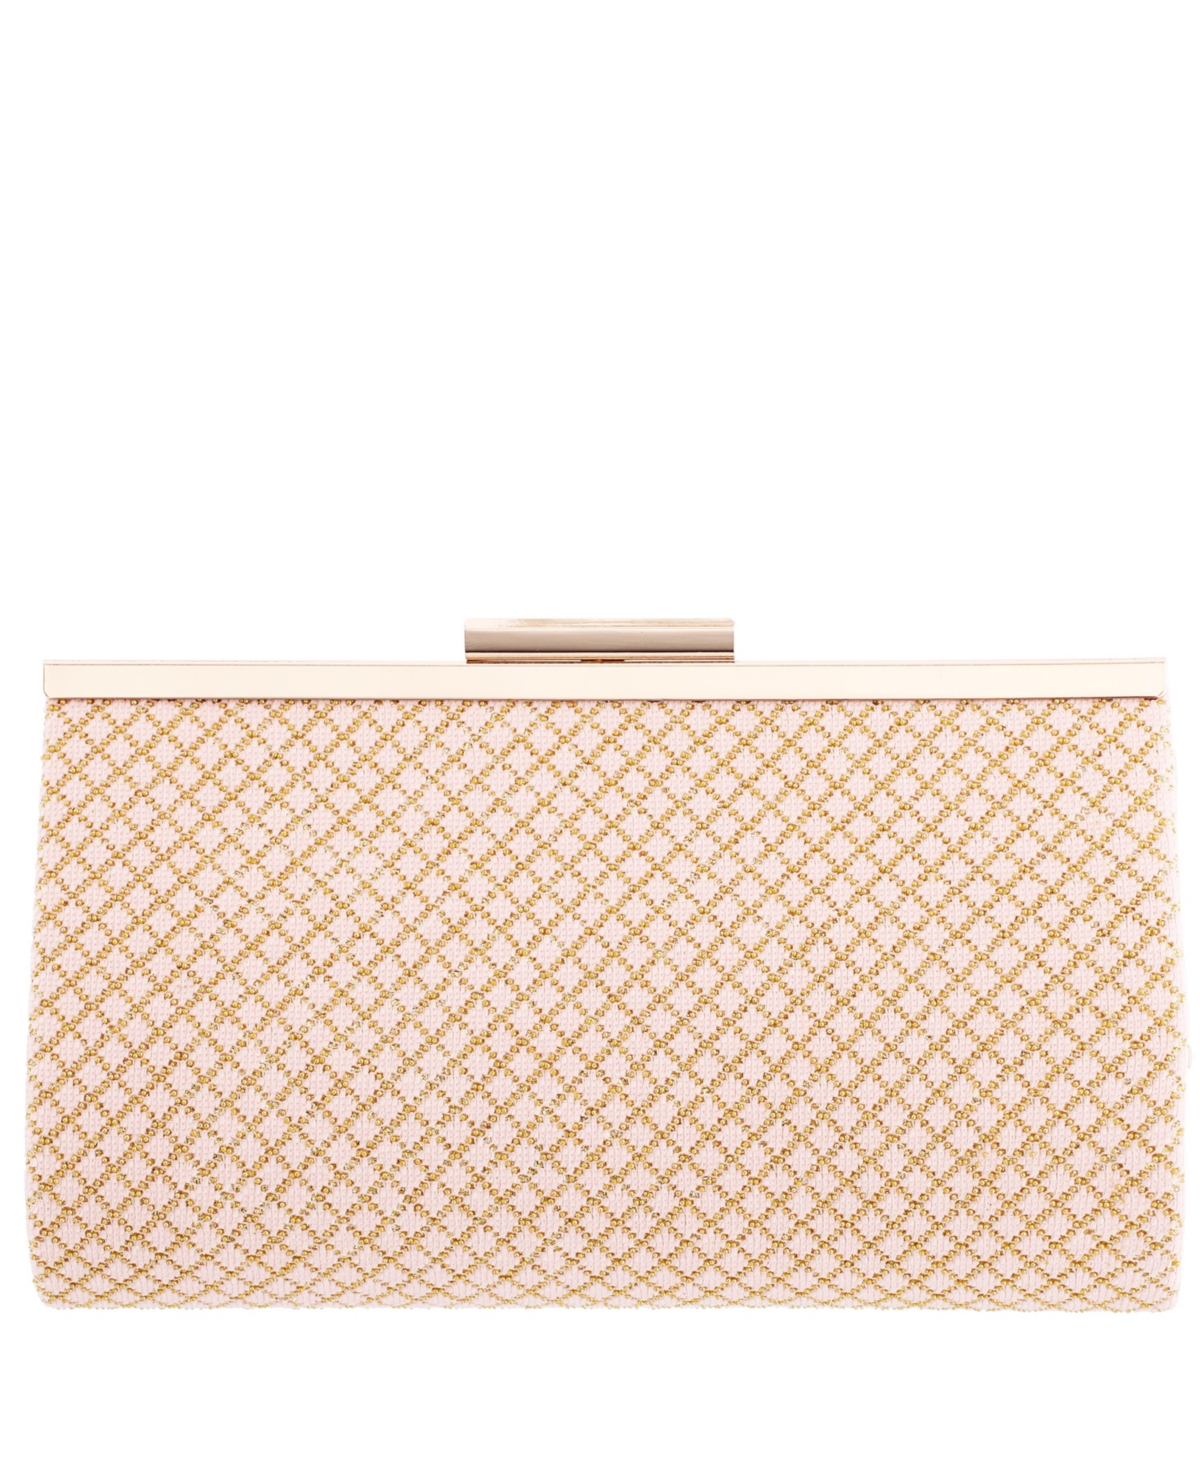 Beaded Pattern Frame Clutch - Champagne